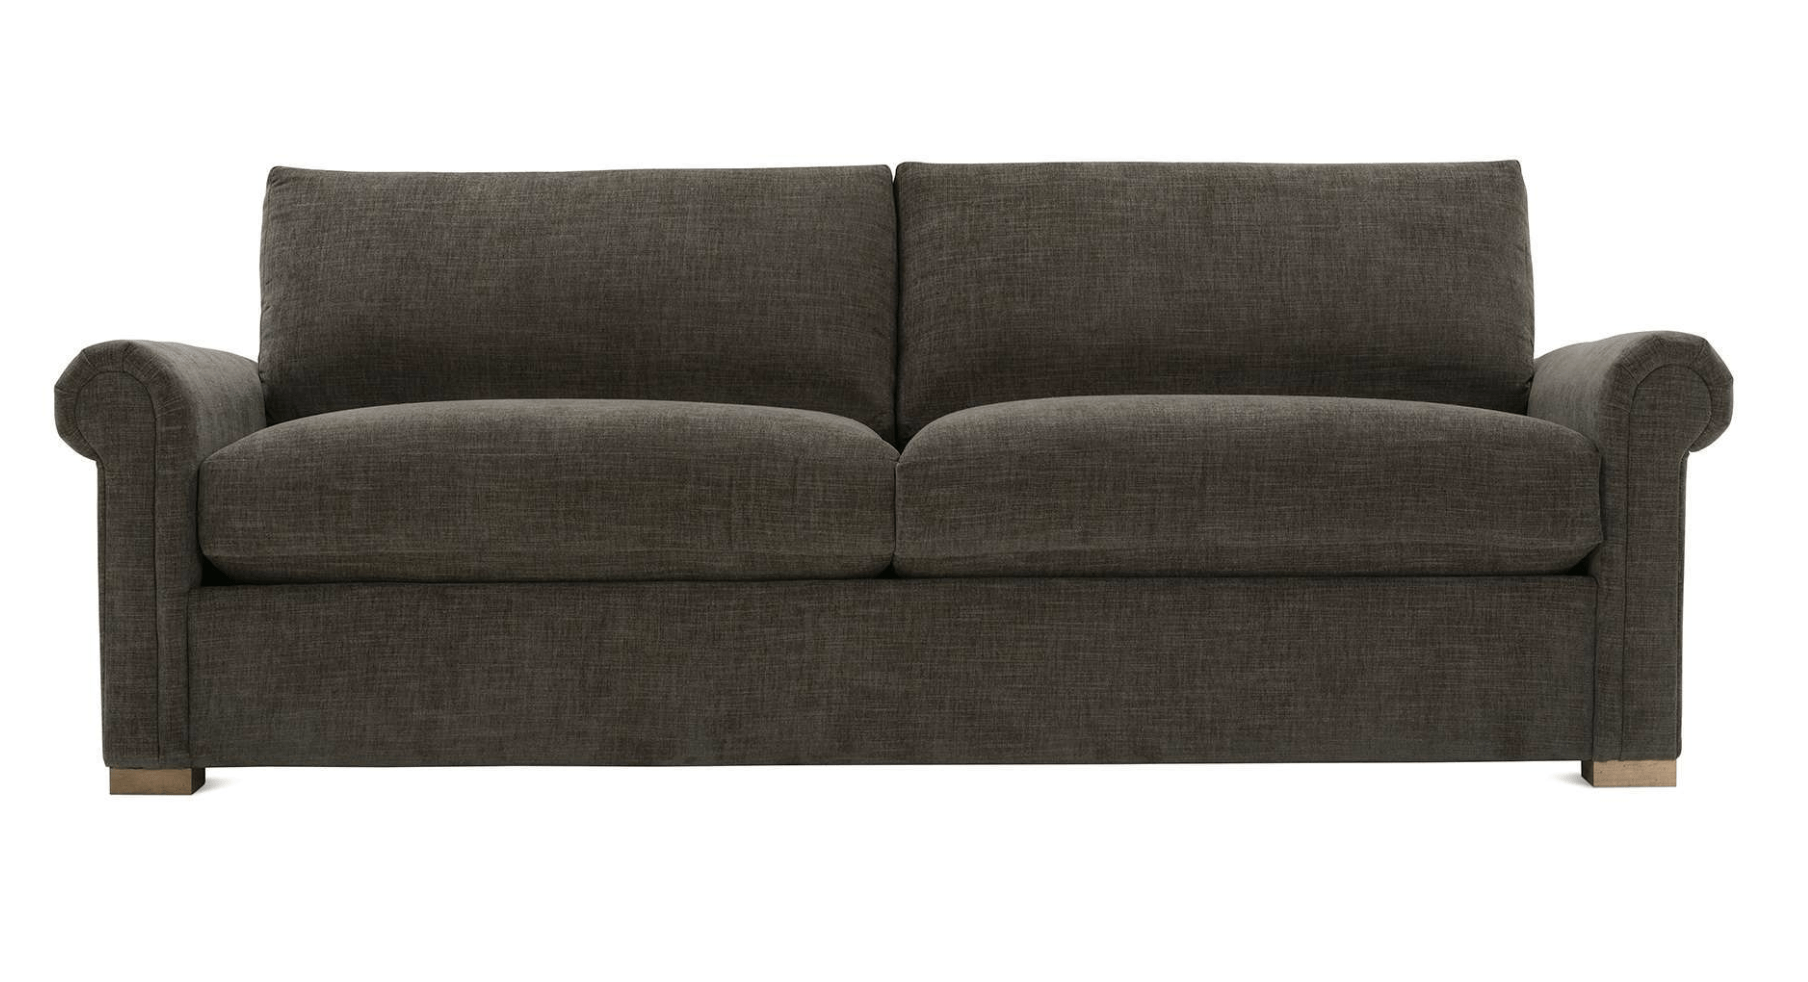 a brown couch is sitting on a white background .